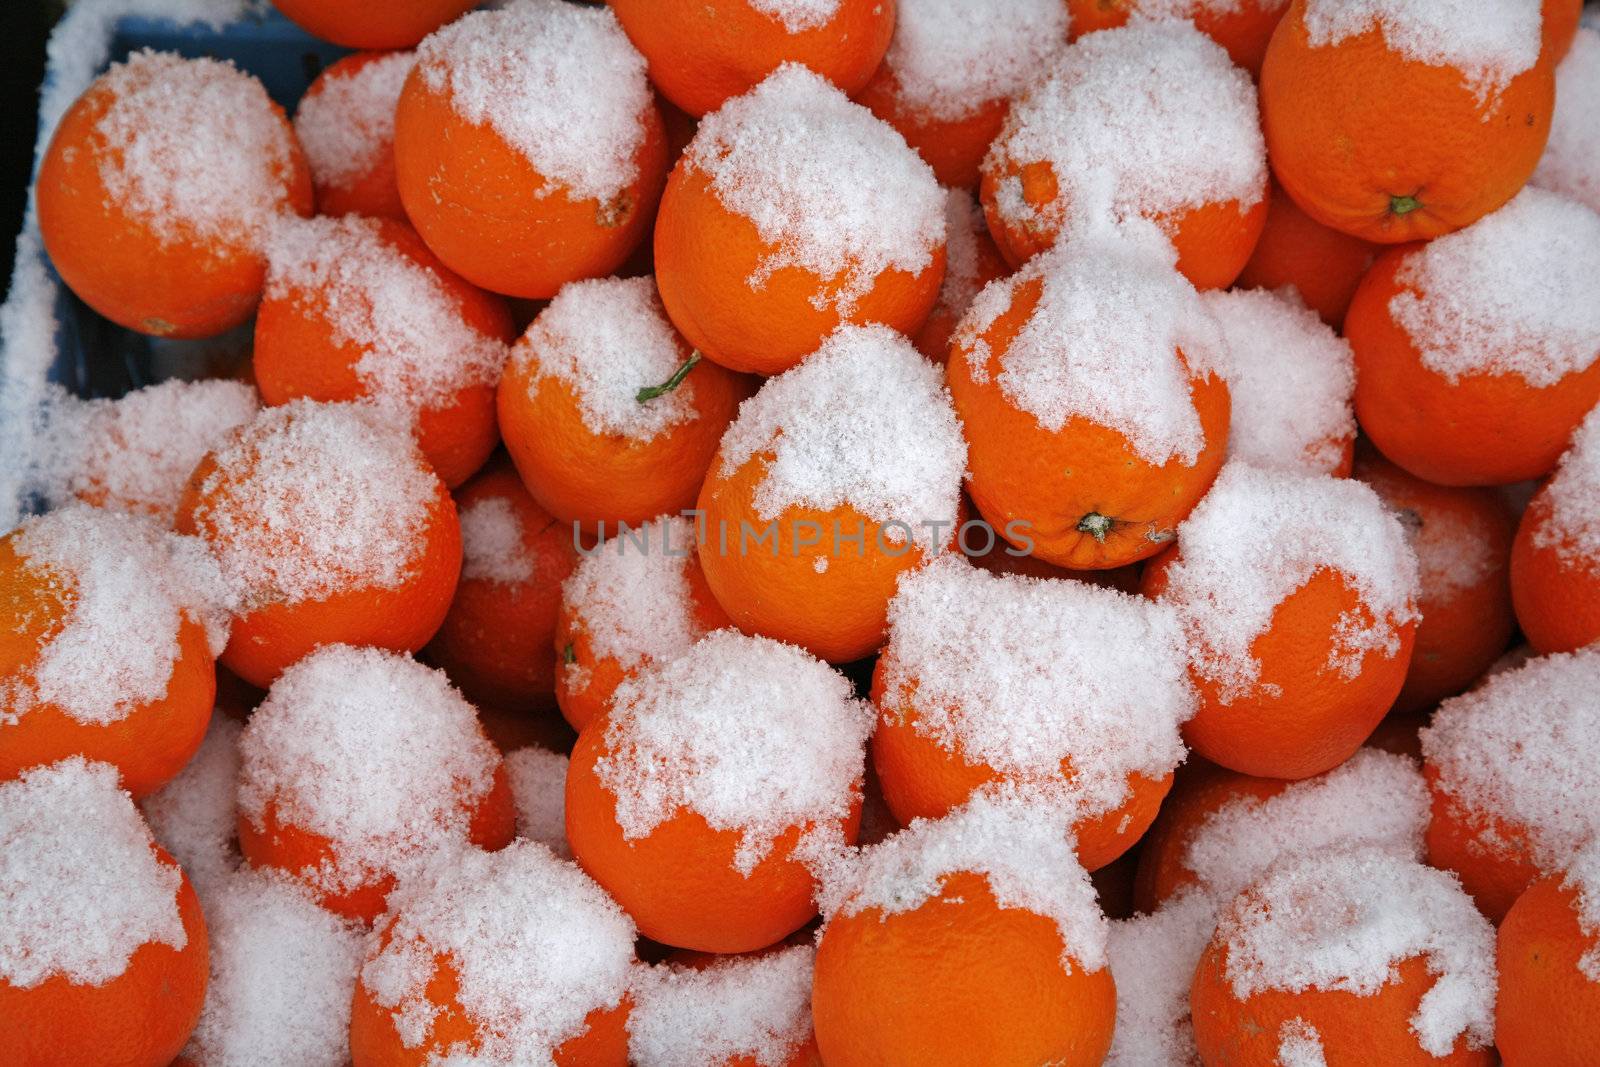 A box of oranges seen at a marketplace a cold winterday.